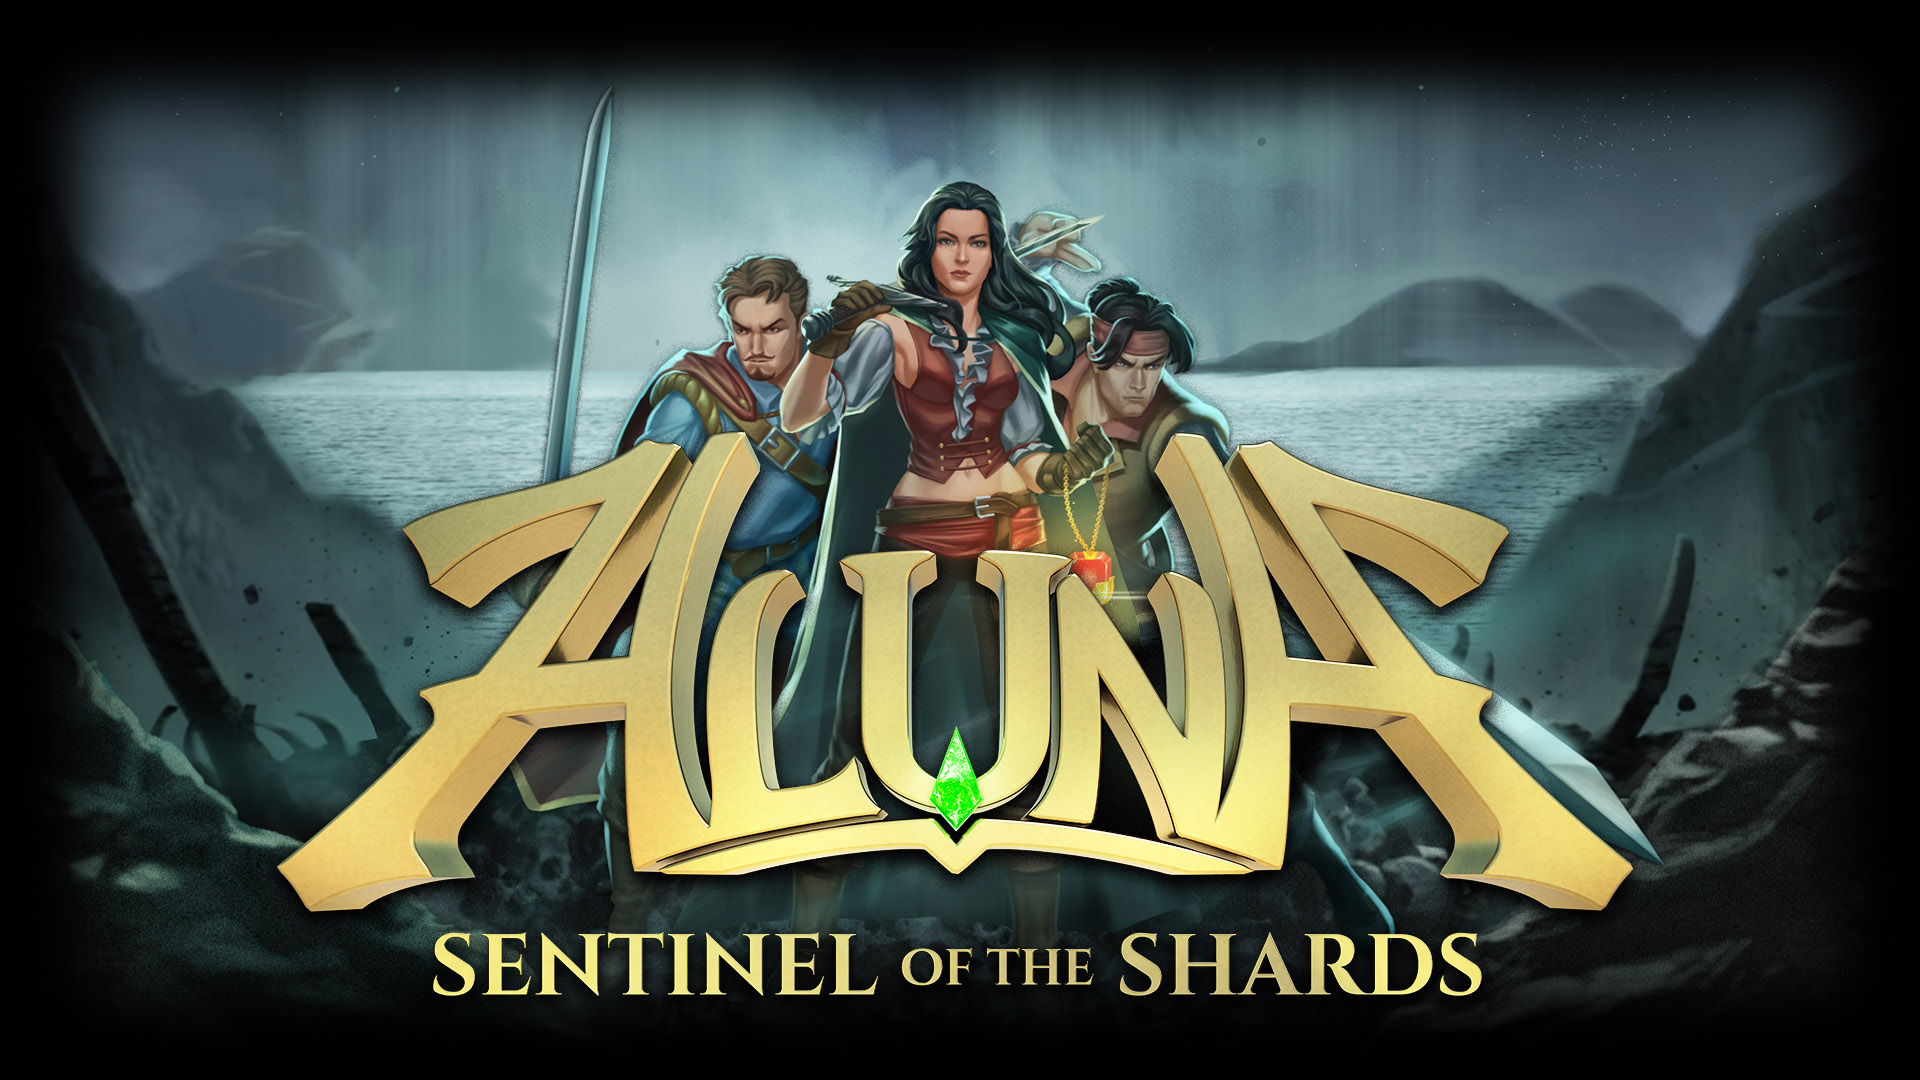 Paula Garces on Comic to Video Game with Aluna: Sentinel of the Shards [Exclusive Interview]